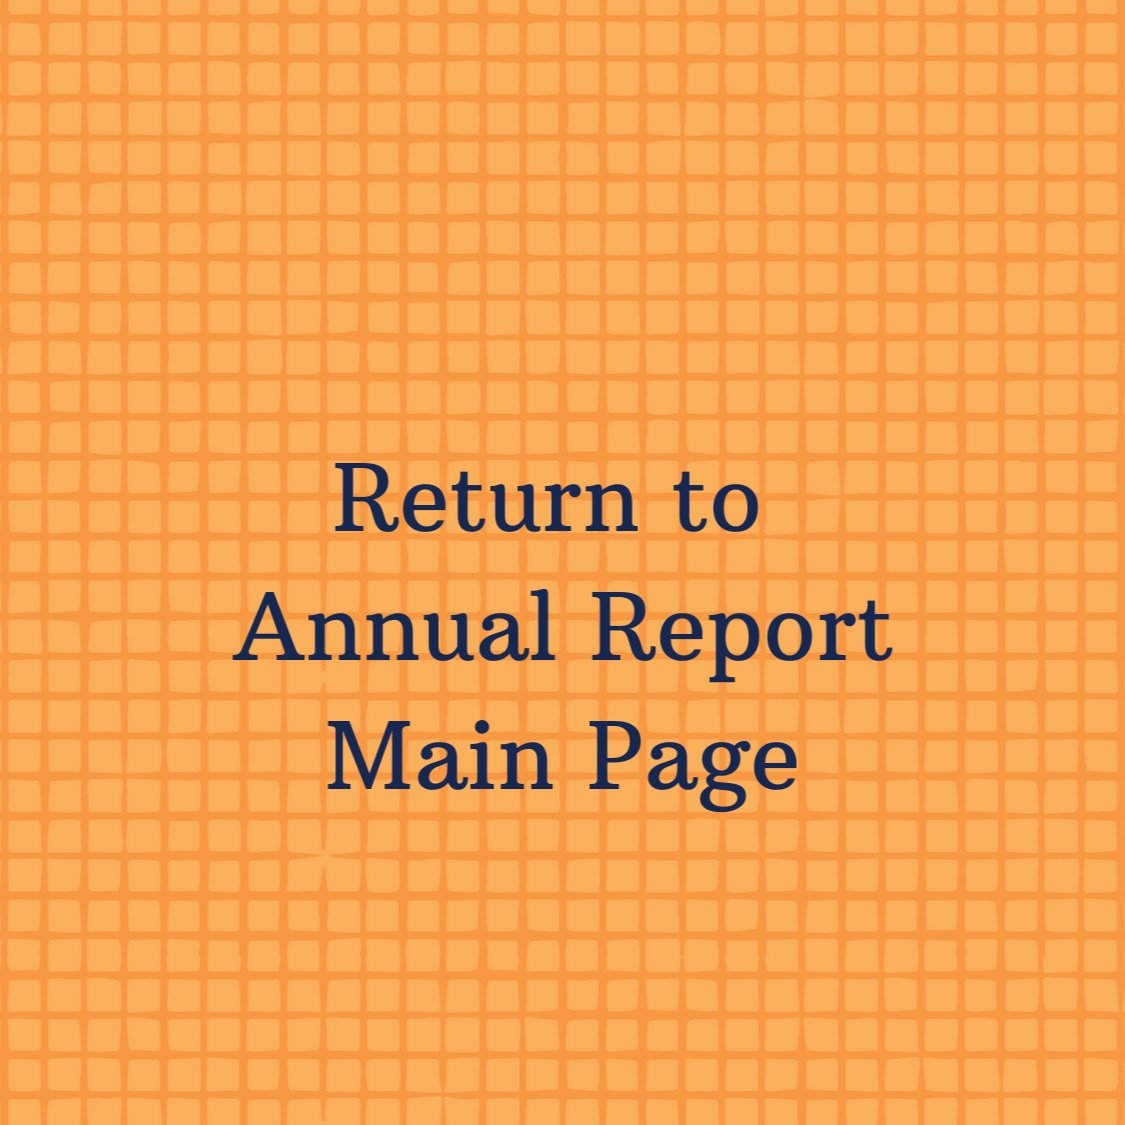 Annual+Report+images-3.jpg